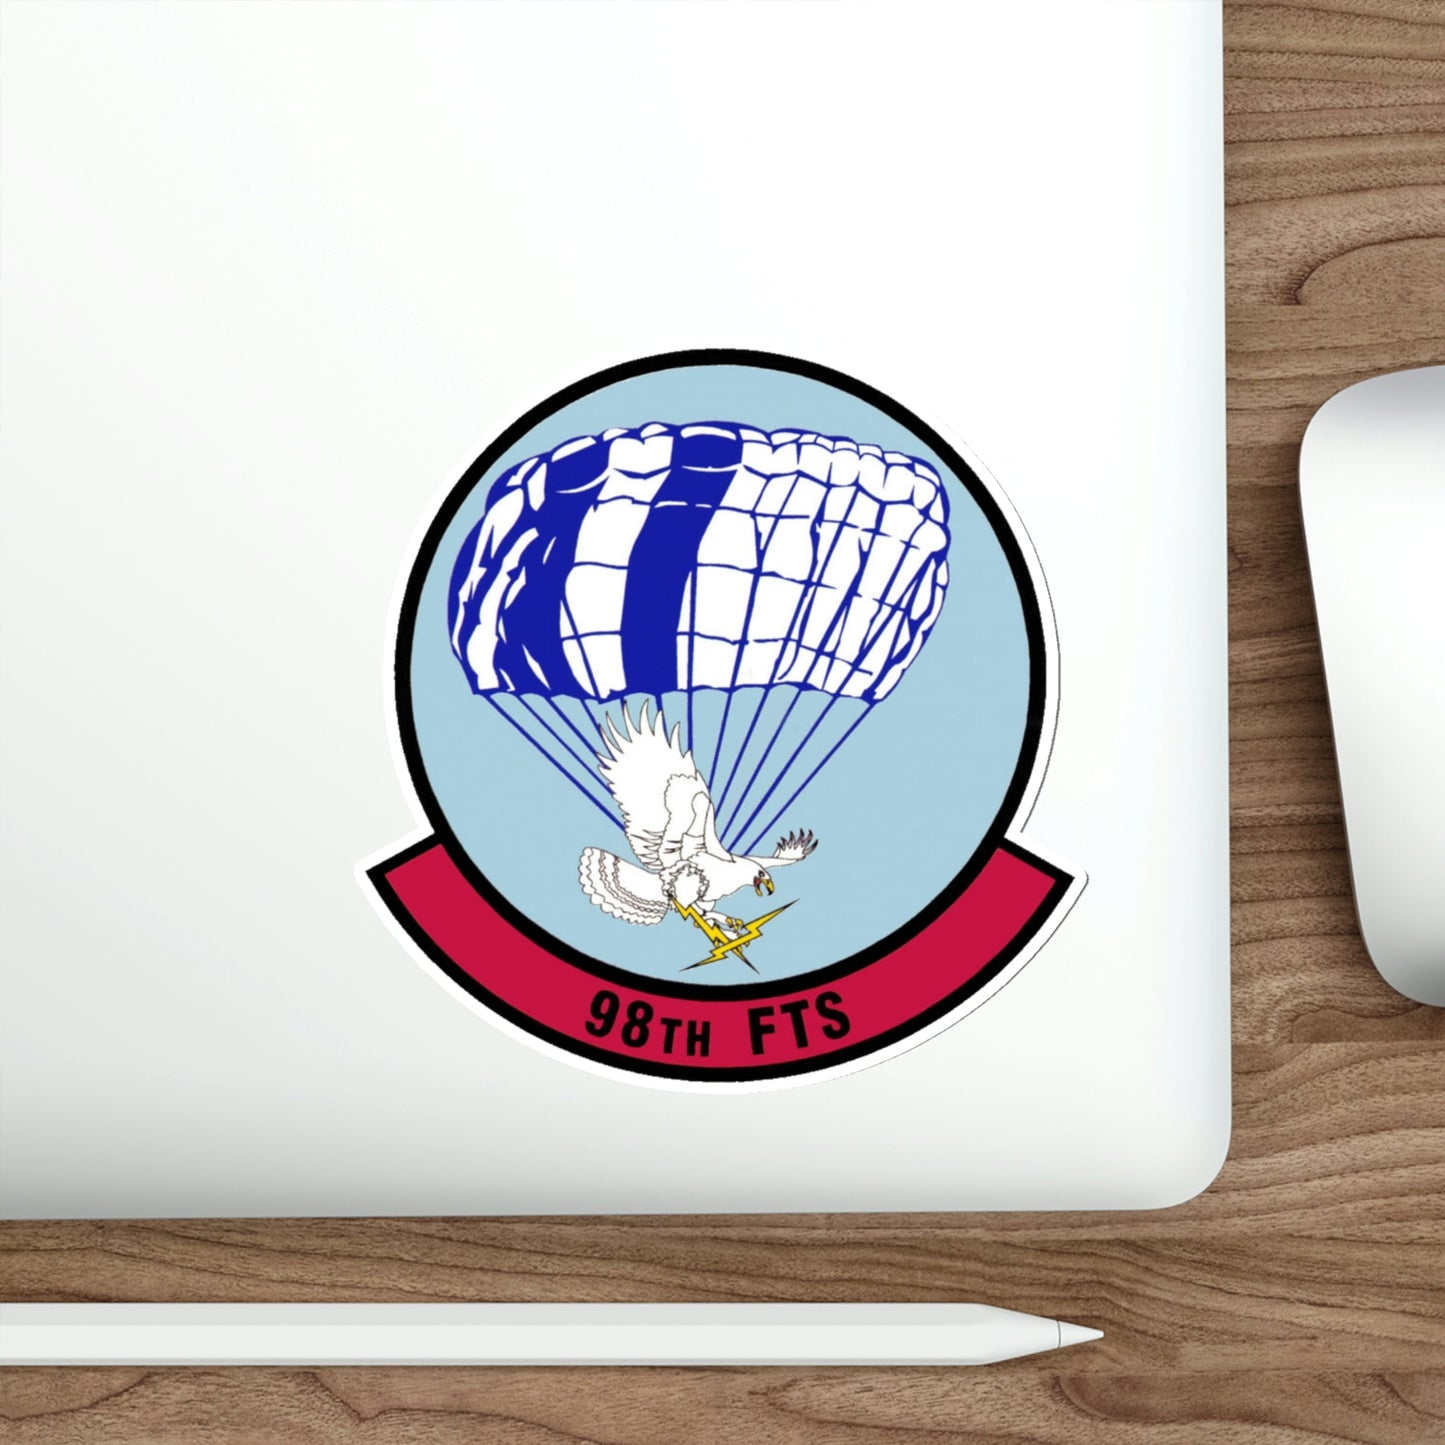 98 Flying Training Squadron AETC (U.S. Air Force) STICKER Vinyl Die-Cut Decal-The Sticker Space